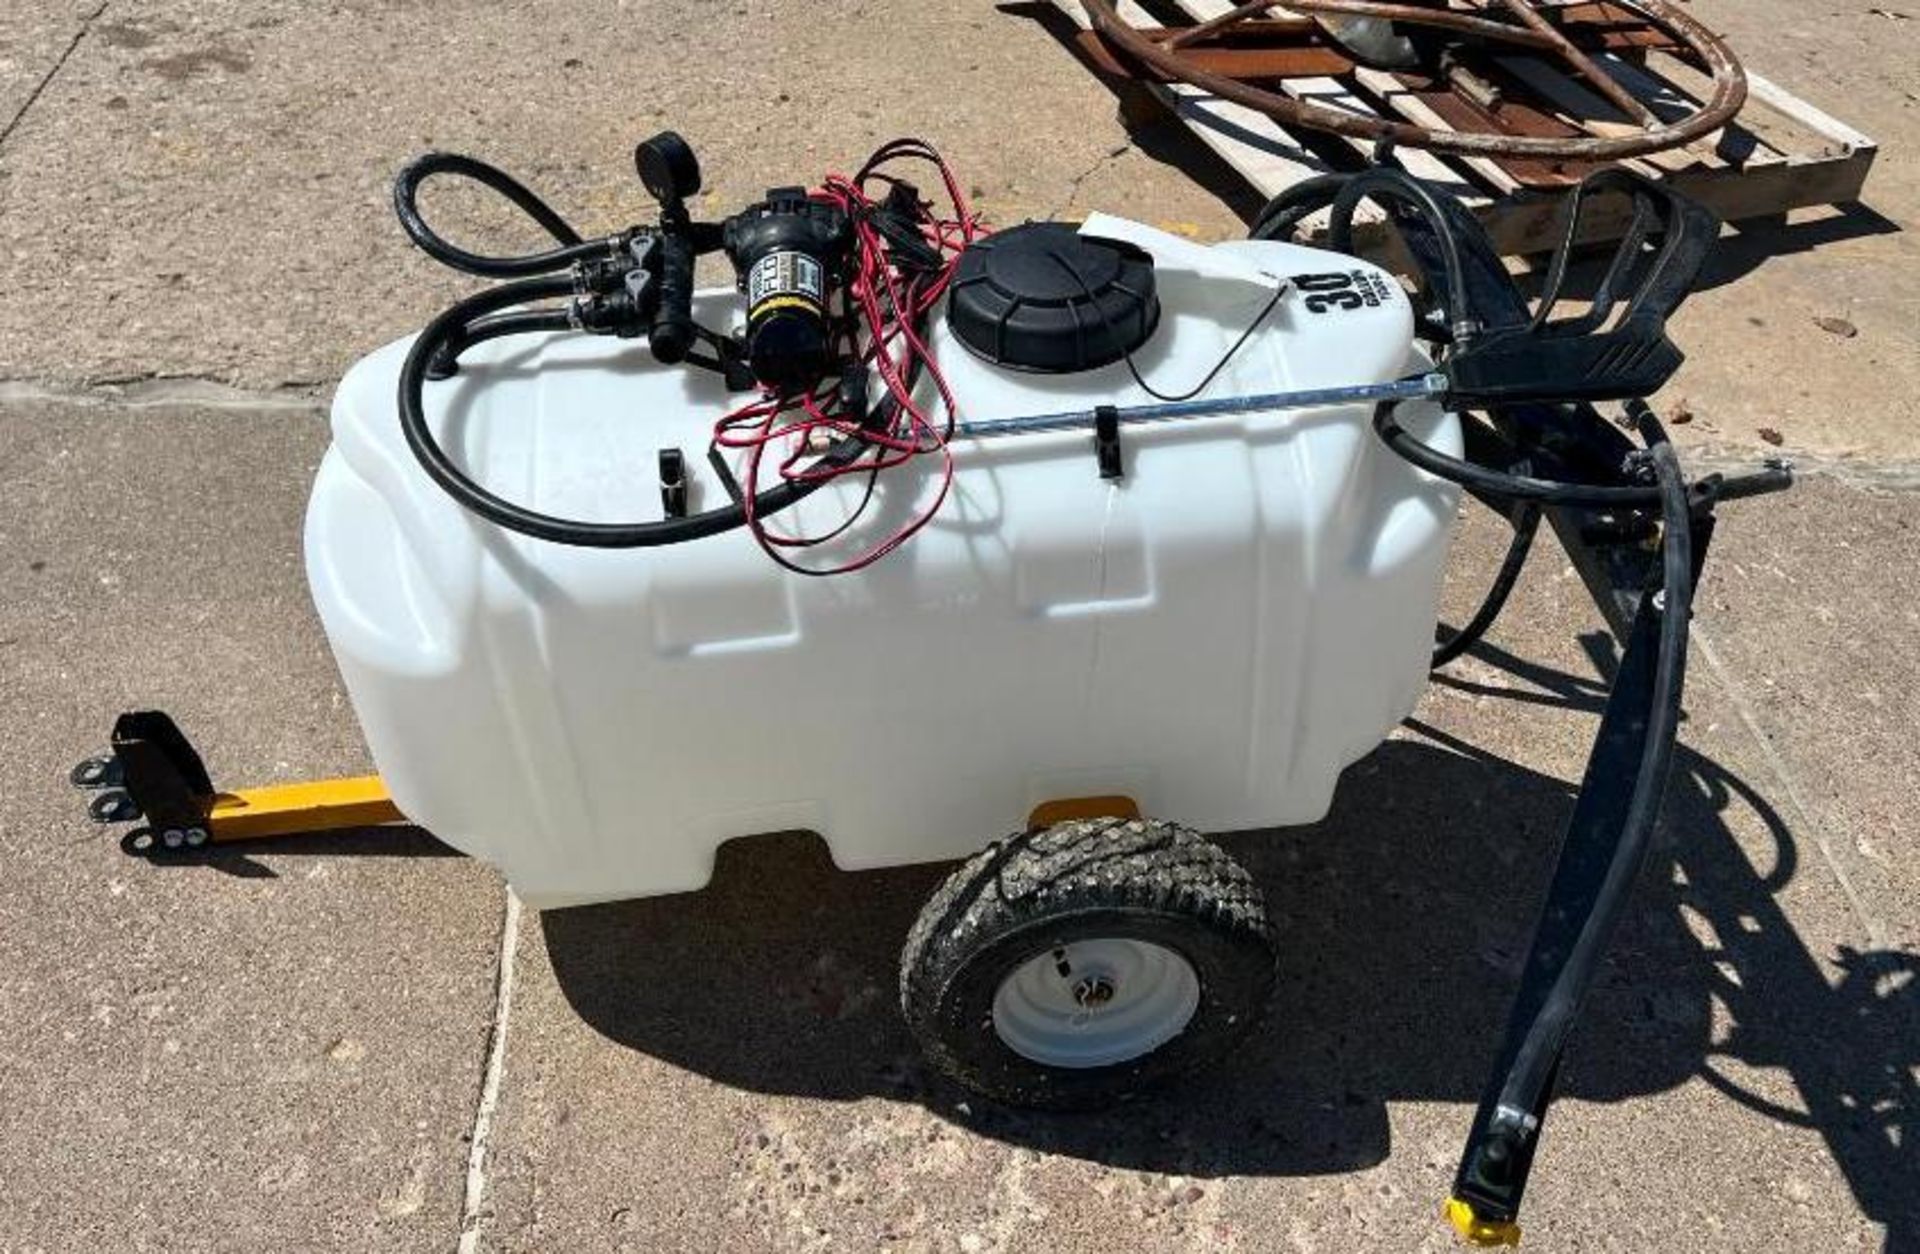 Countyline Tractor Supply 30 Gallon Sprayer, Model TX30G-CL, High Flo Gold Series Pump. Located in M